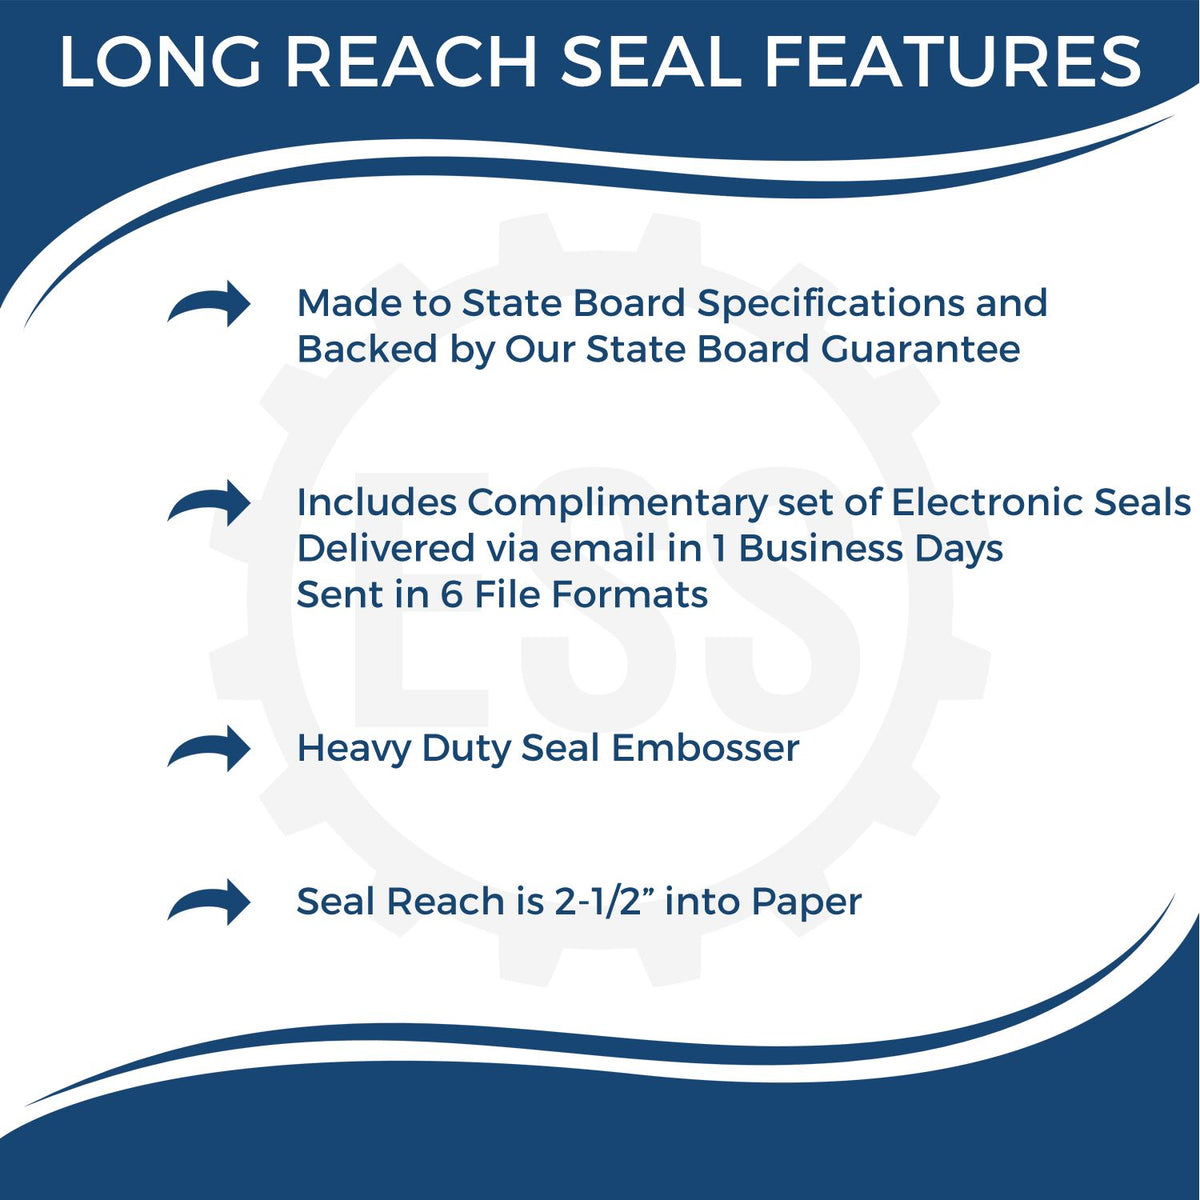 A picture of an infographic highlighting the selling points for the Long Reach Georgia PE Seal